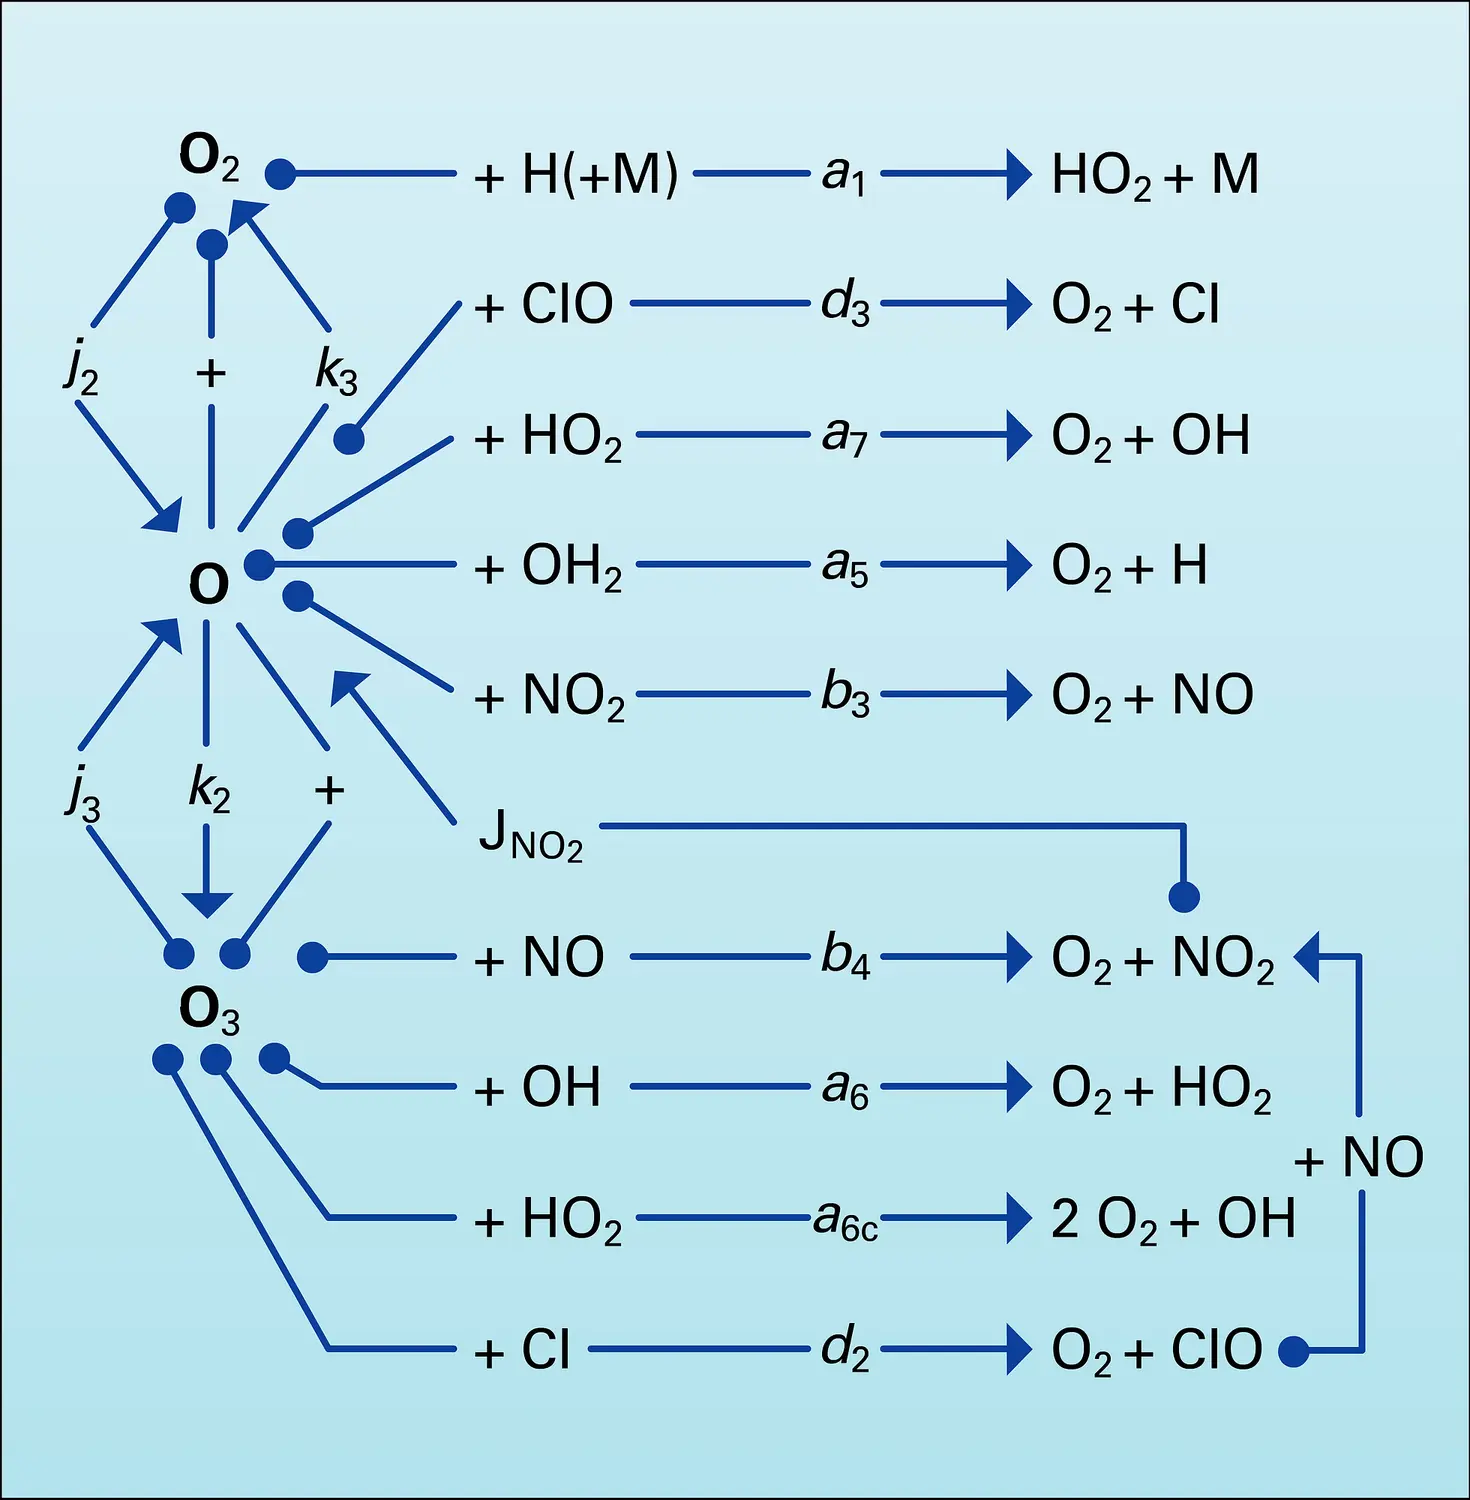 Réactions catalytiques de l'ozone (O<inf>3</inf>)